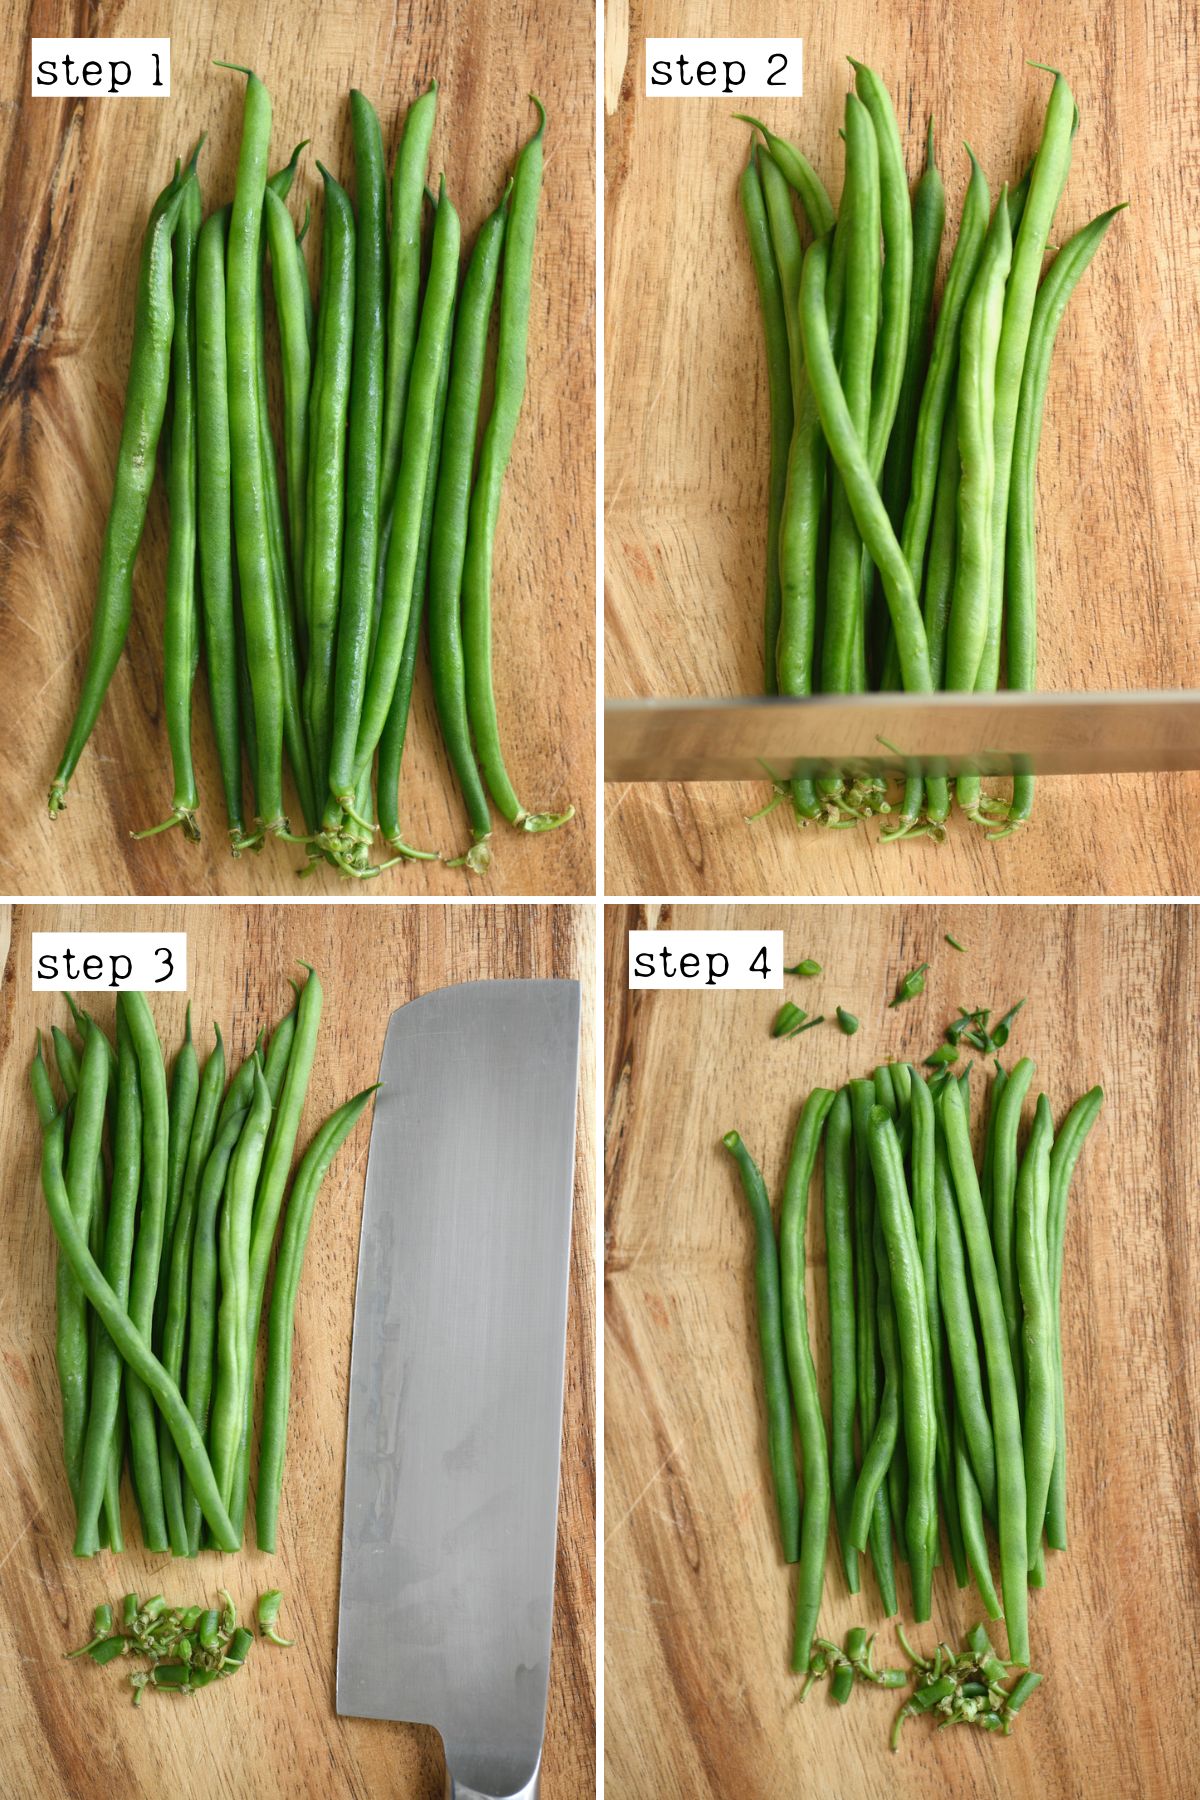 Steps for trimming green beans